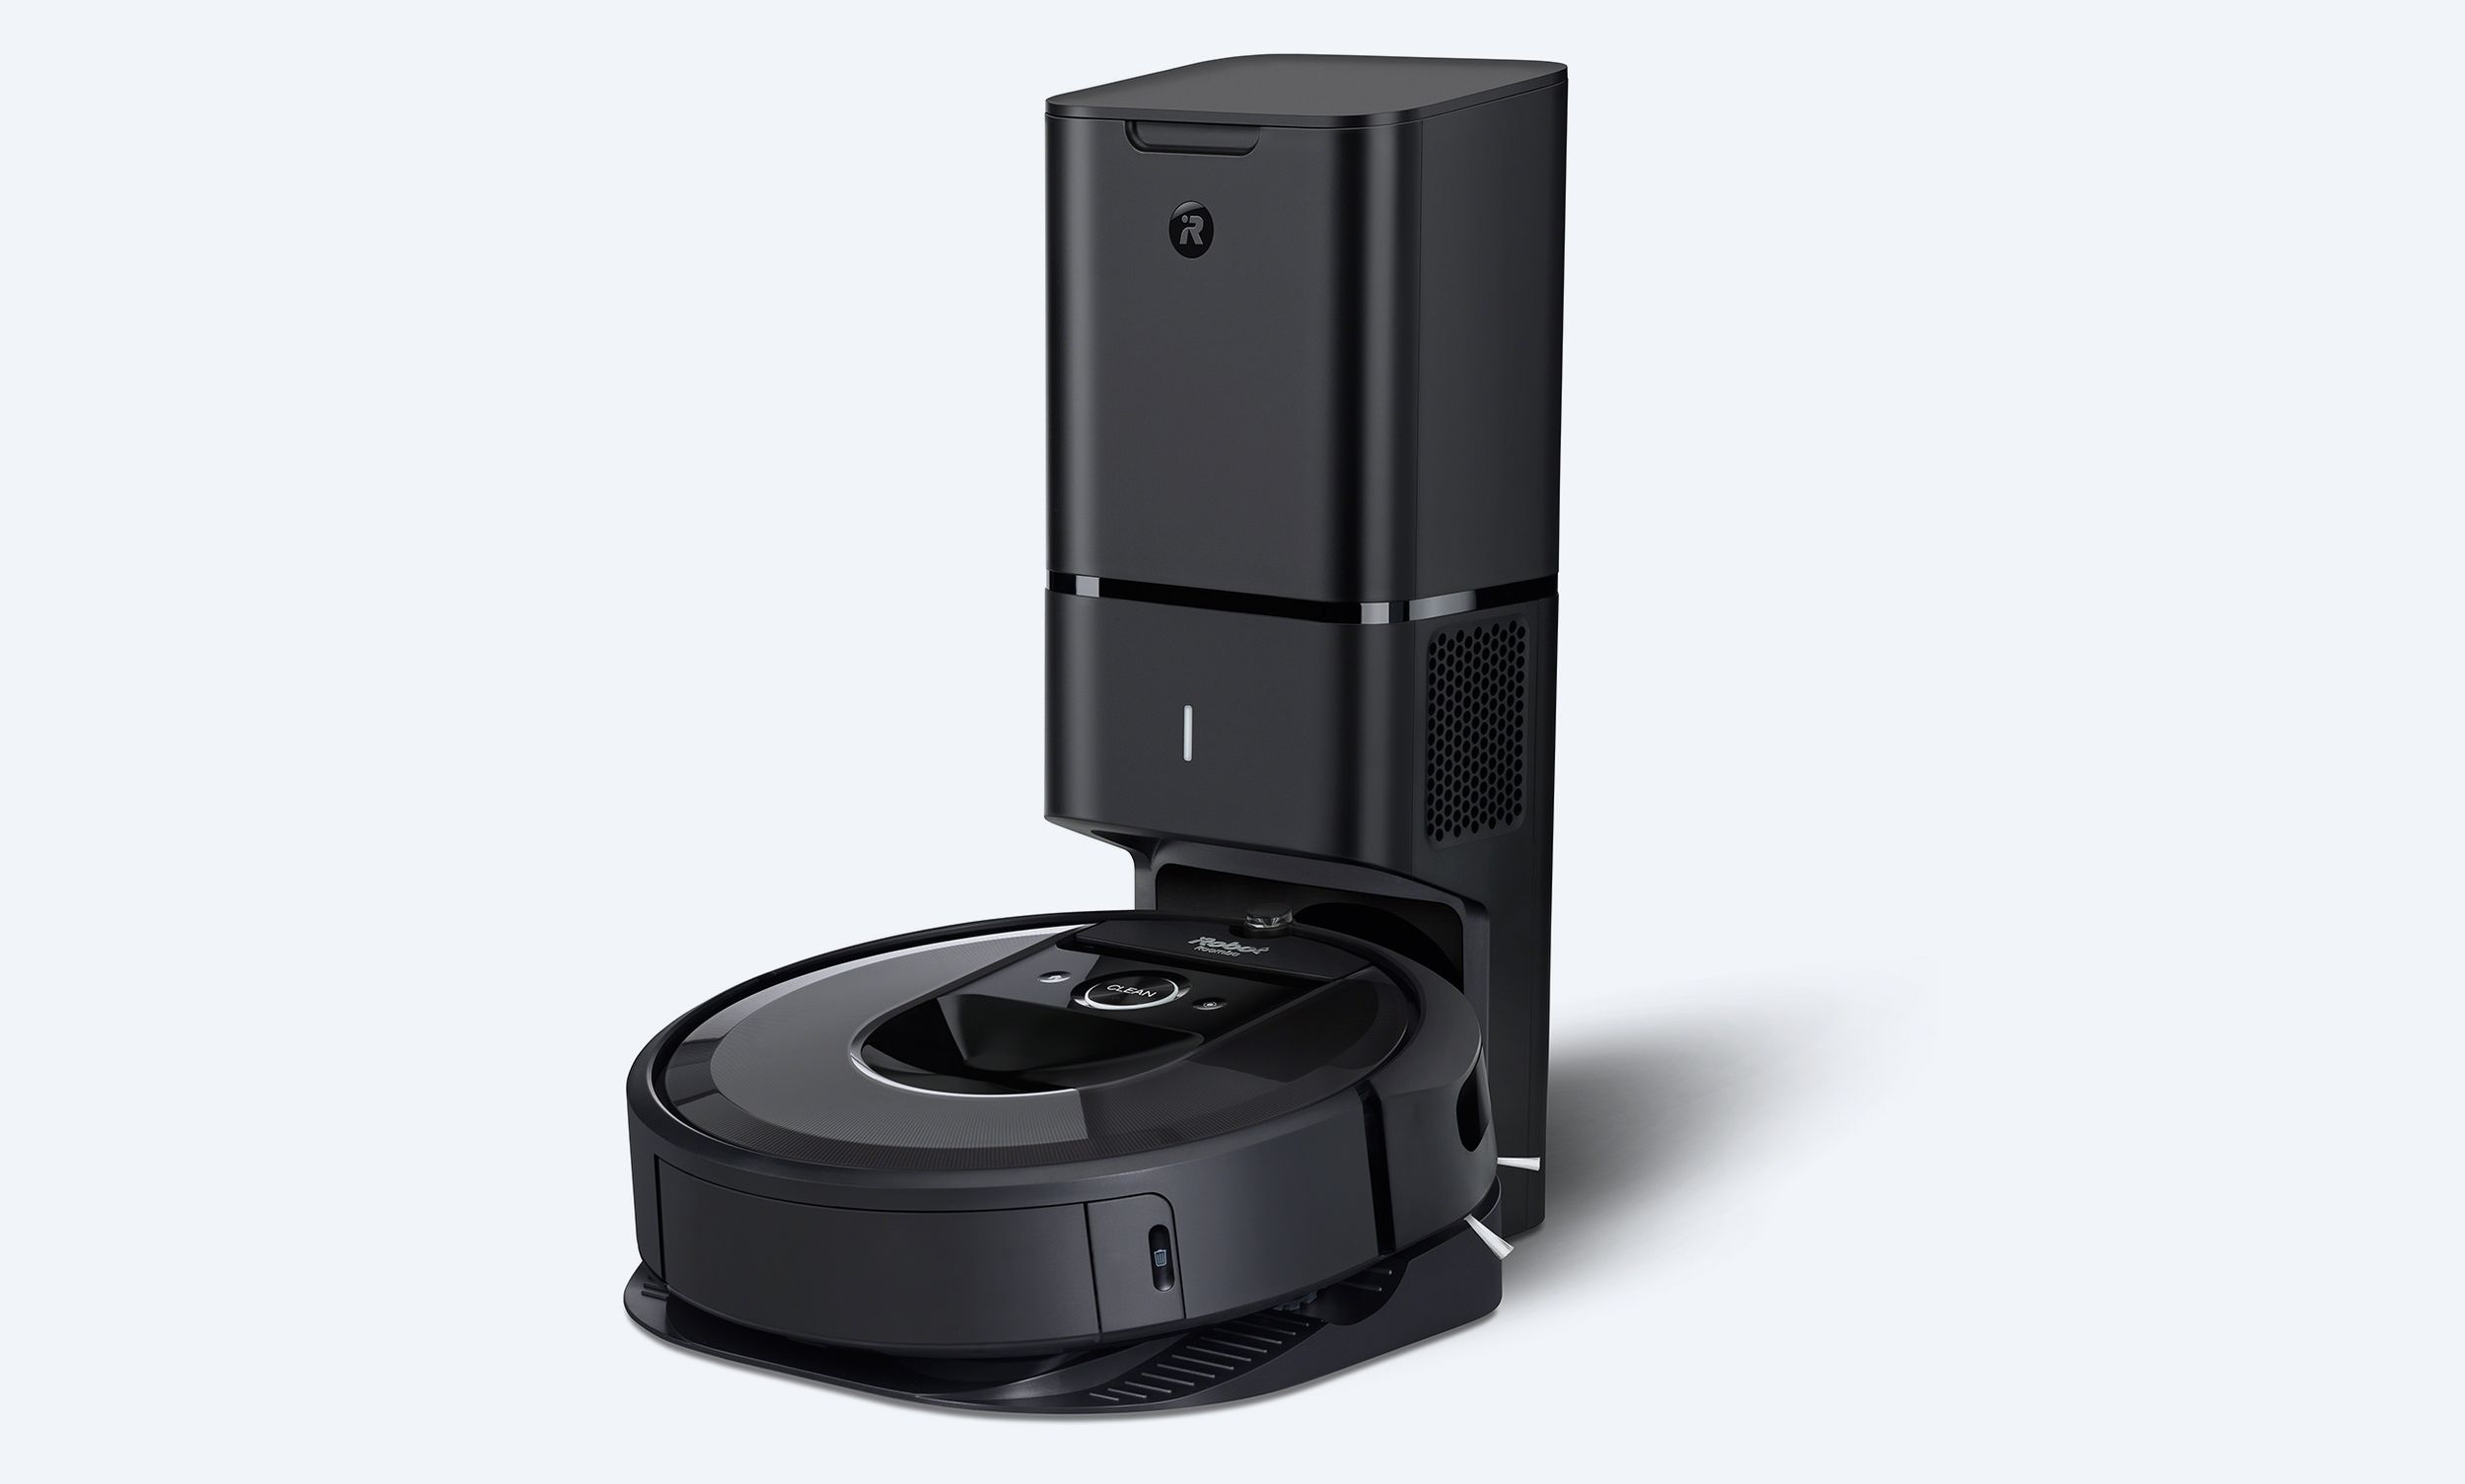 iRobot's Clean Base Automatic Dirt Disposal, which automatically empties the contents of the Roomba i7+ dust bin into the Clean Base